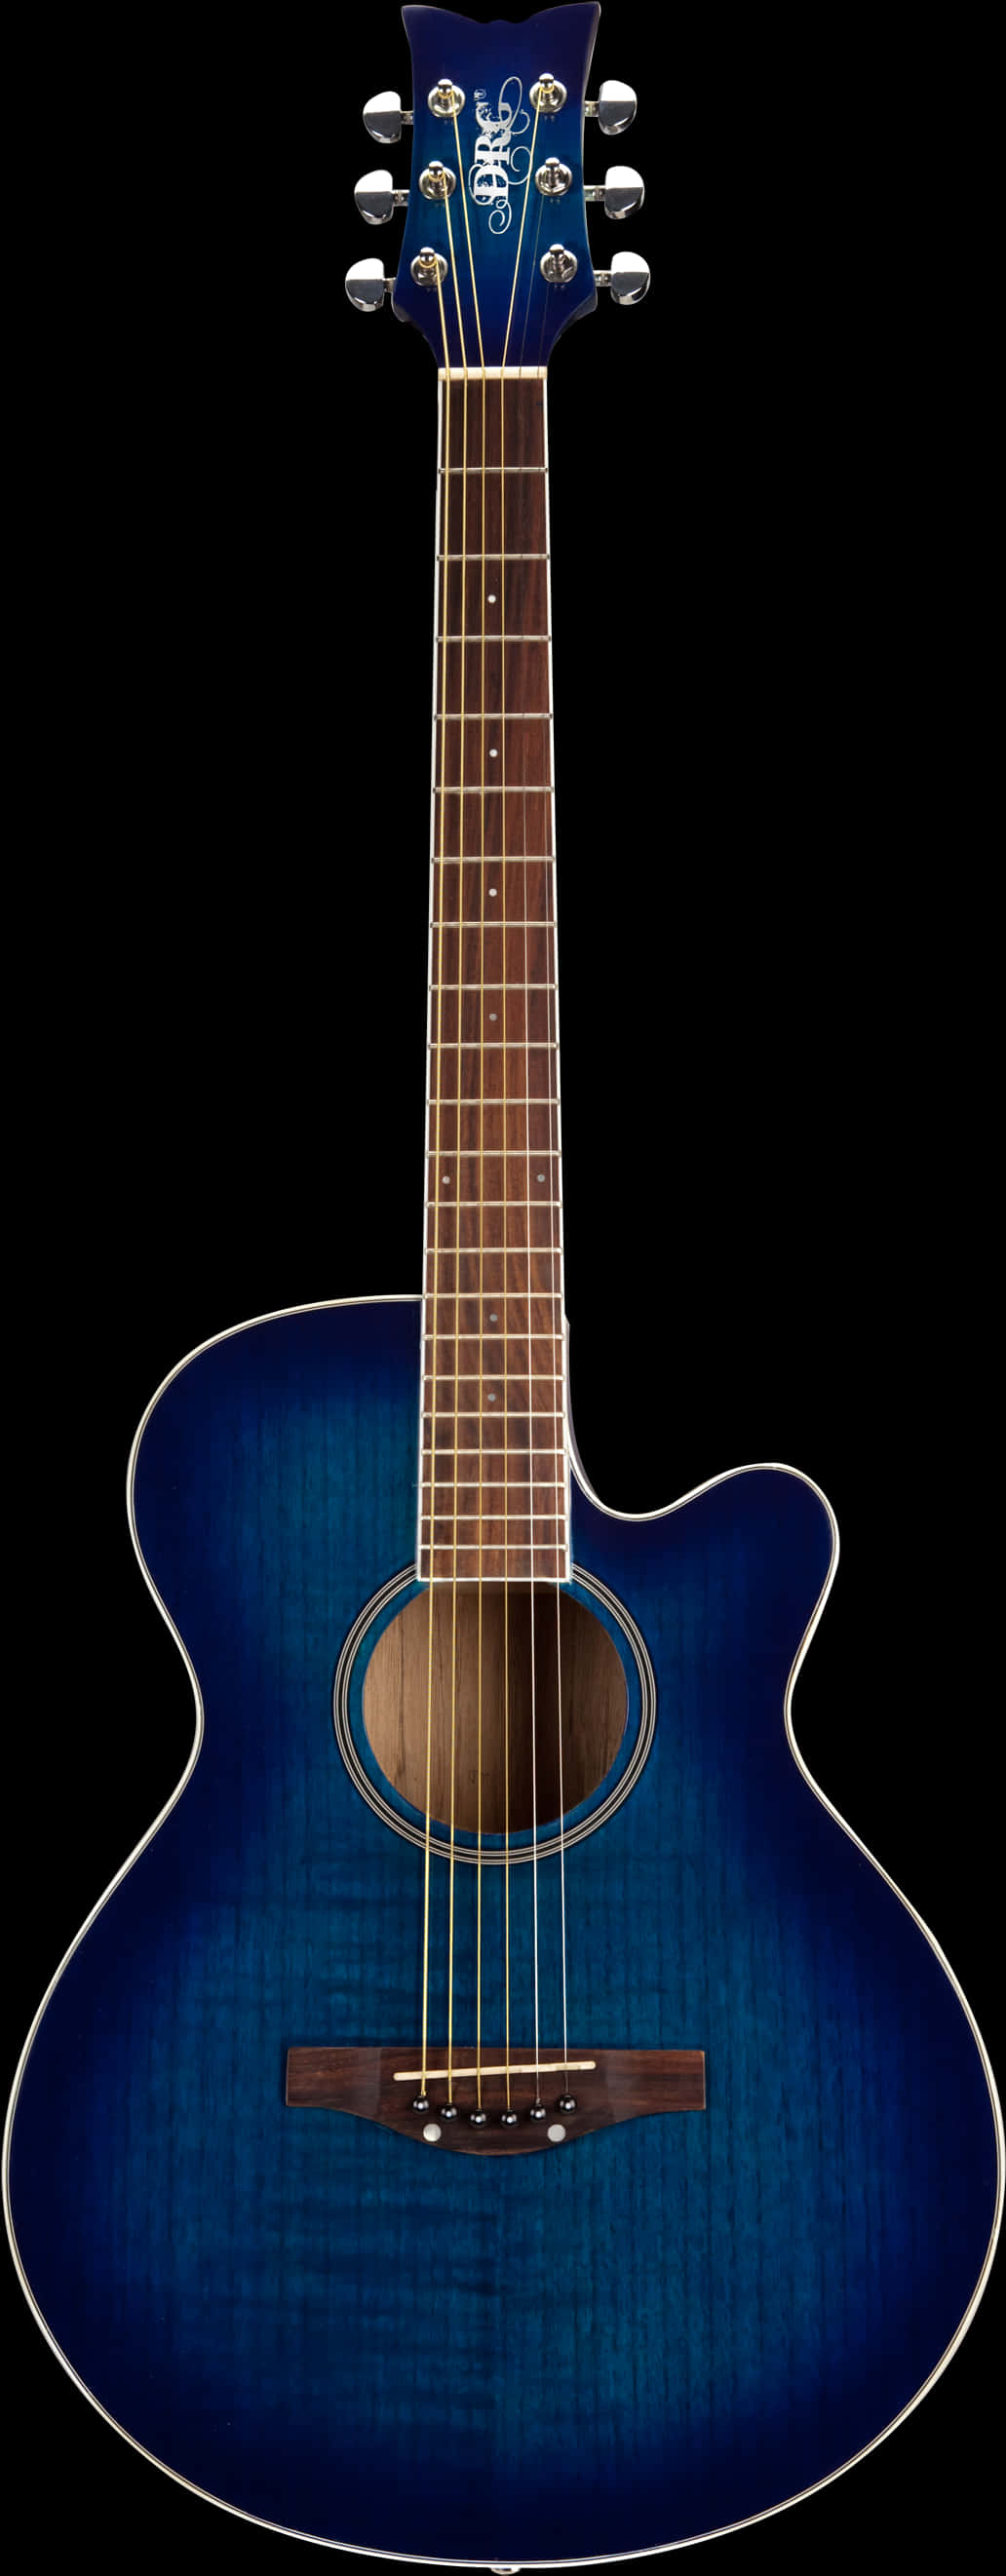 Blue Acoustic Guitar Isolated